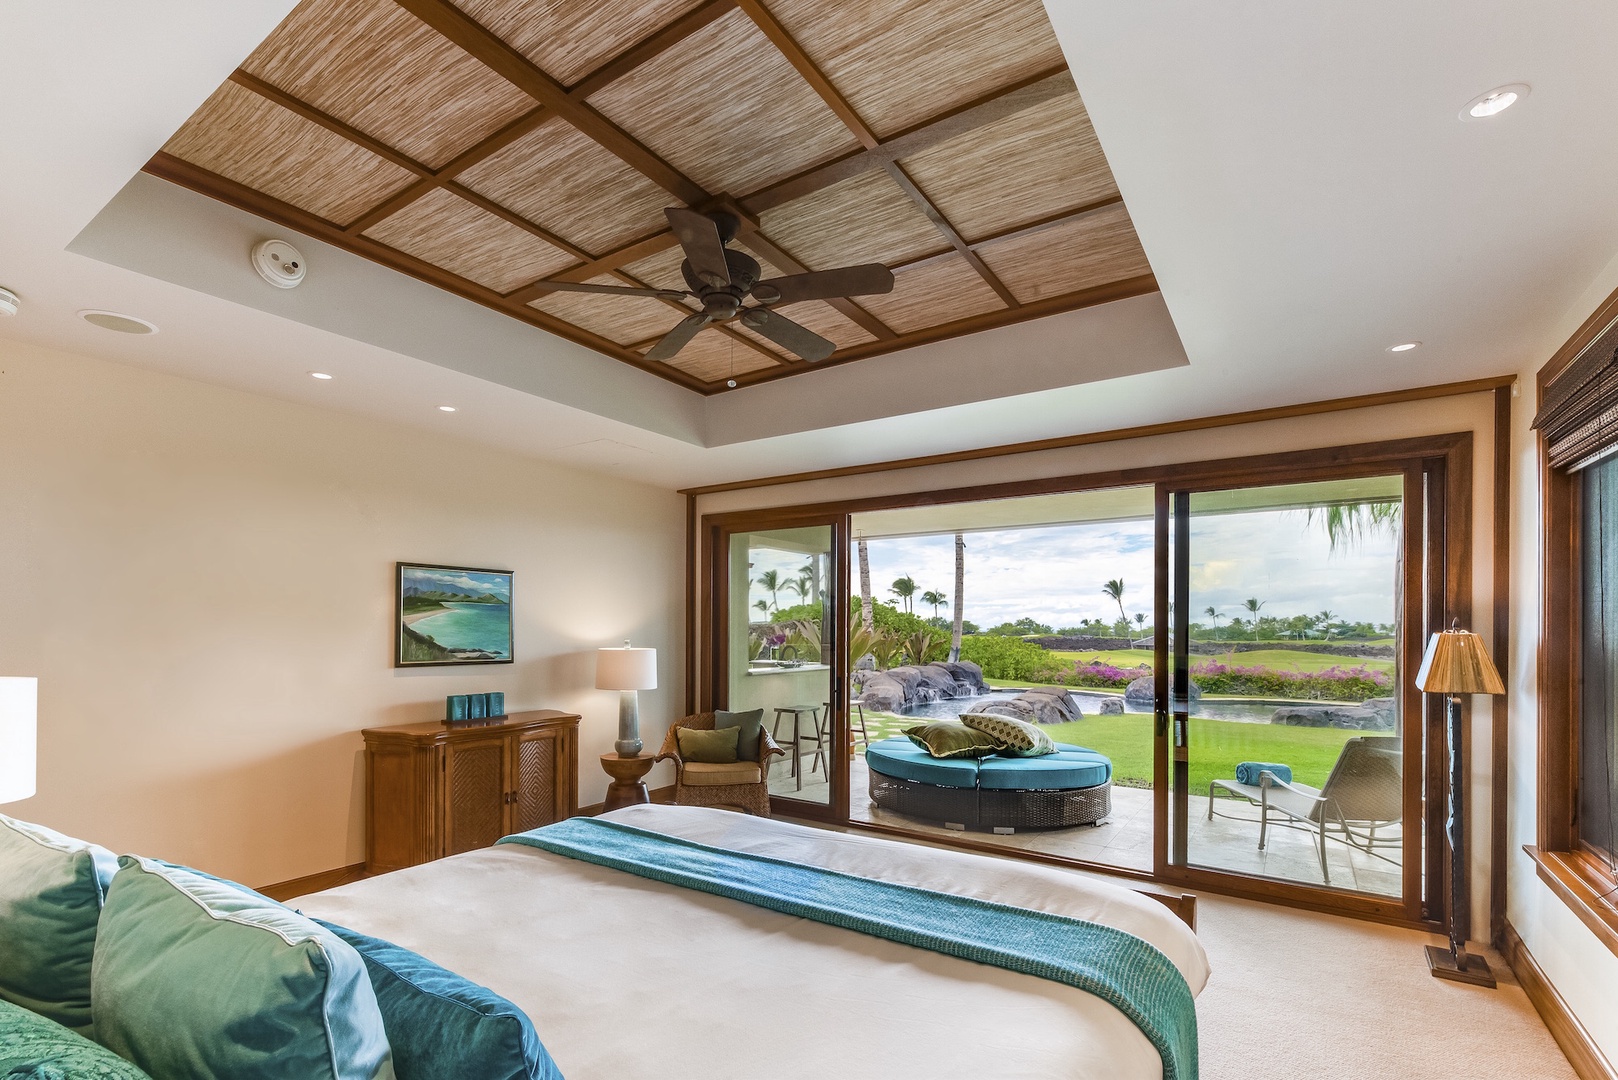 Kamuela Vacation Rentals, 3BD OneOcean (1C) at Mauna Lani Resort - Downstairs Primary Bedroom w/ Electronic Pocket Doors Open to Separate Lanai and Pool Area.